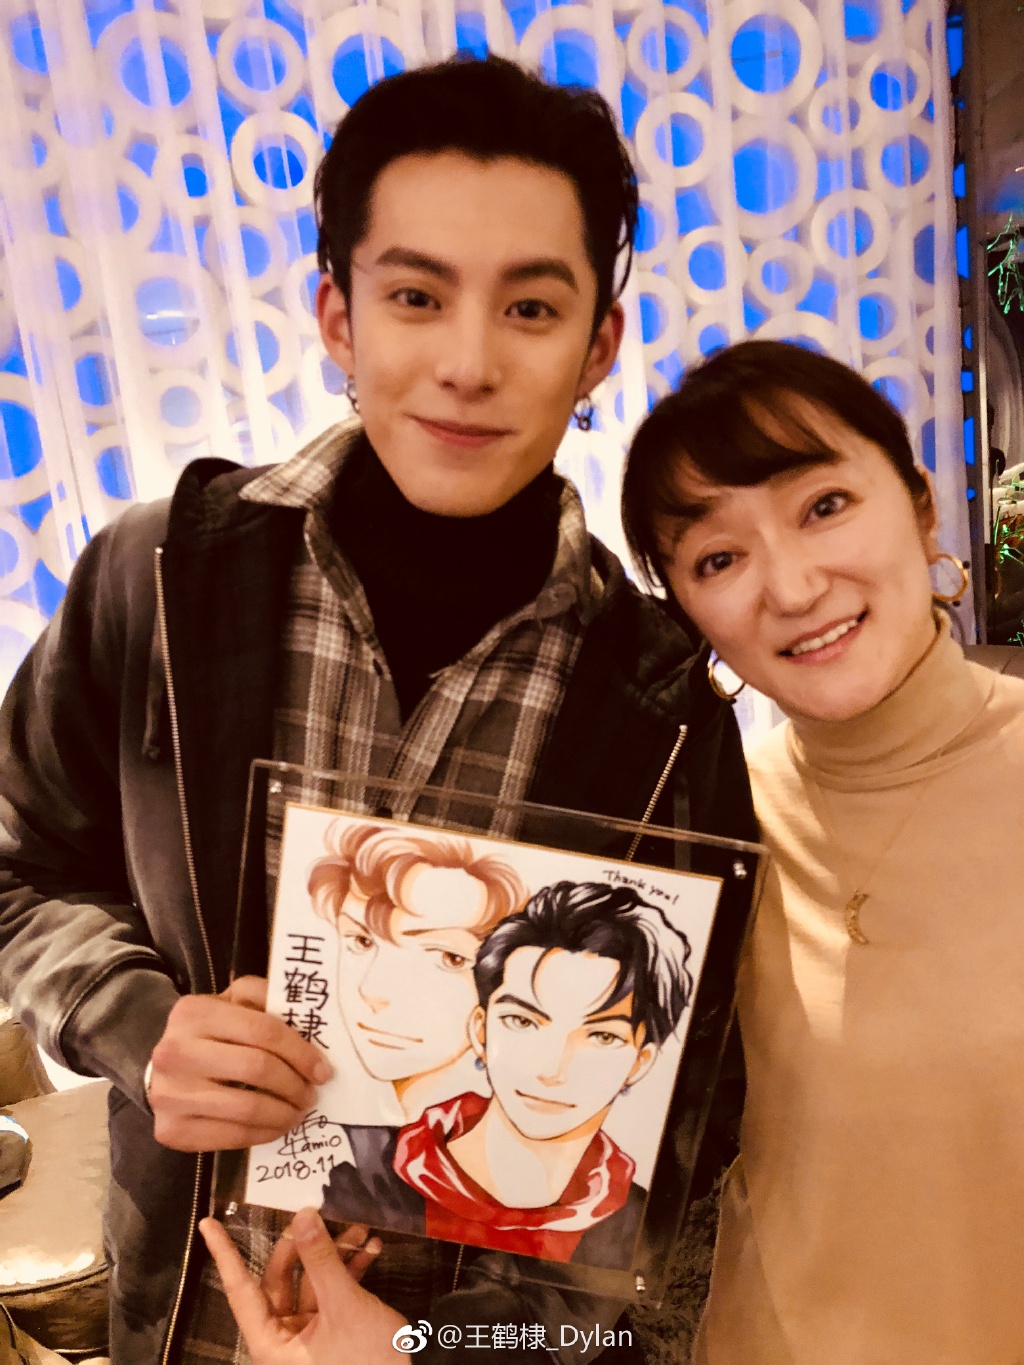 Which Dylan Wang Chinese drama should I watch first, Meteor Garden (2018)  or A Rational Life (2021)? - Quora